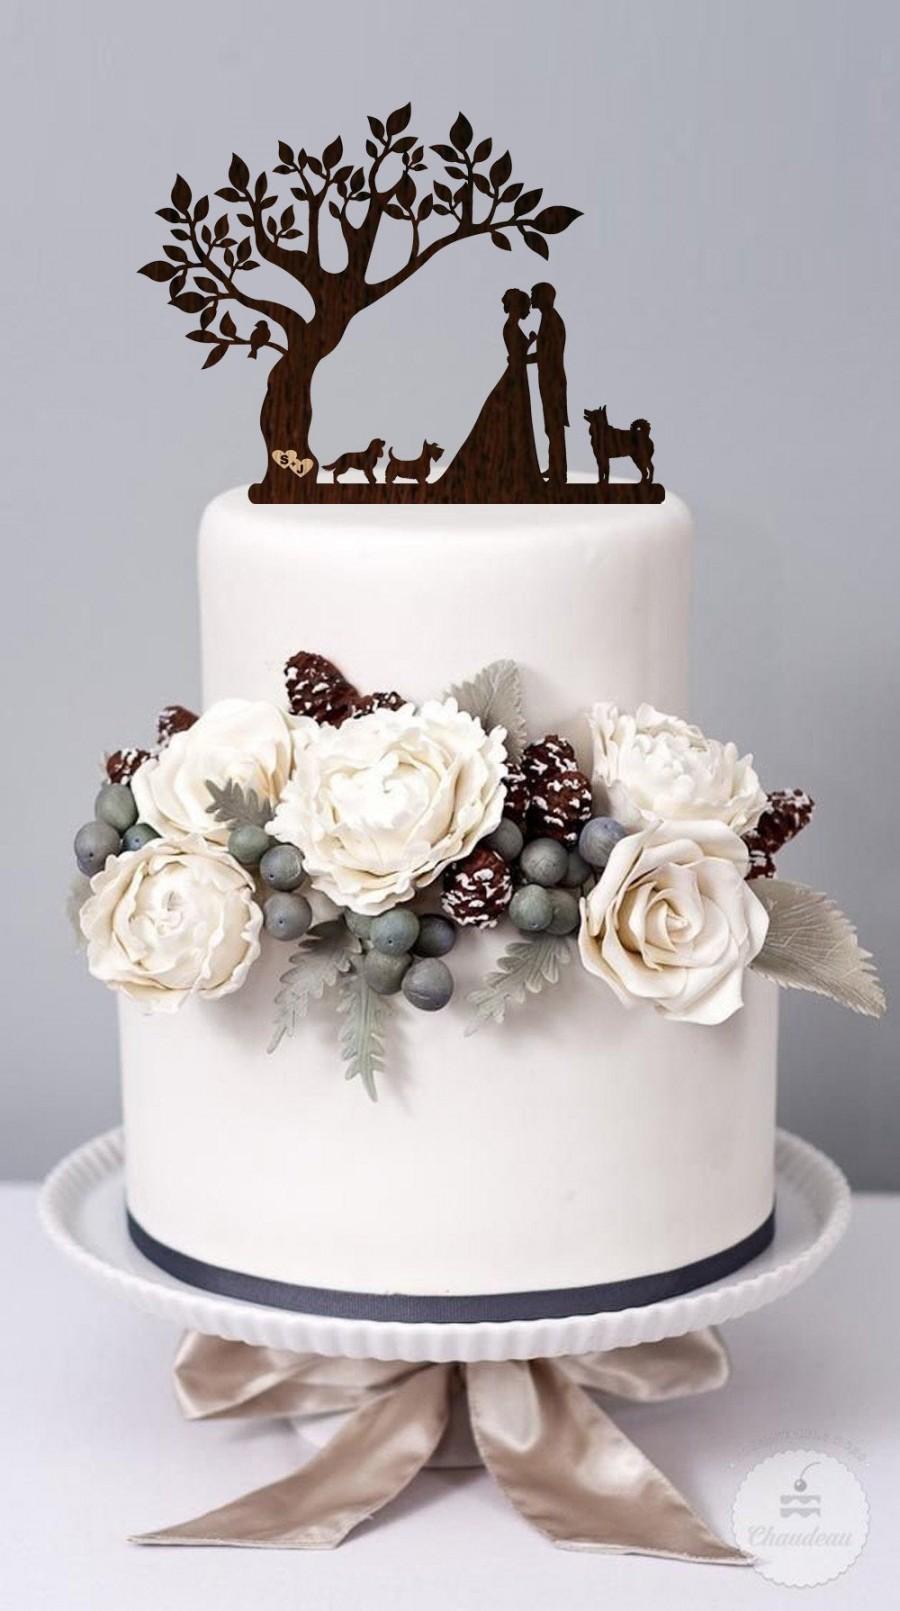 Wedding - Wedding cake topper with Dog Bride Groom Silhouette Family Wedding Cake Topper Mr and Mrs with Вog Сustomized Еopper Couple Kissing with dog